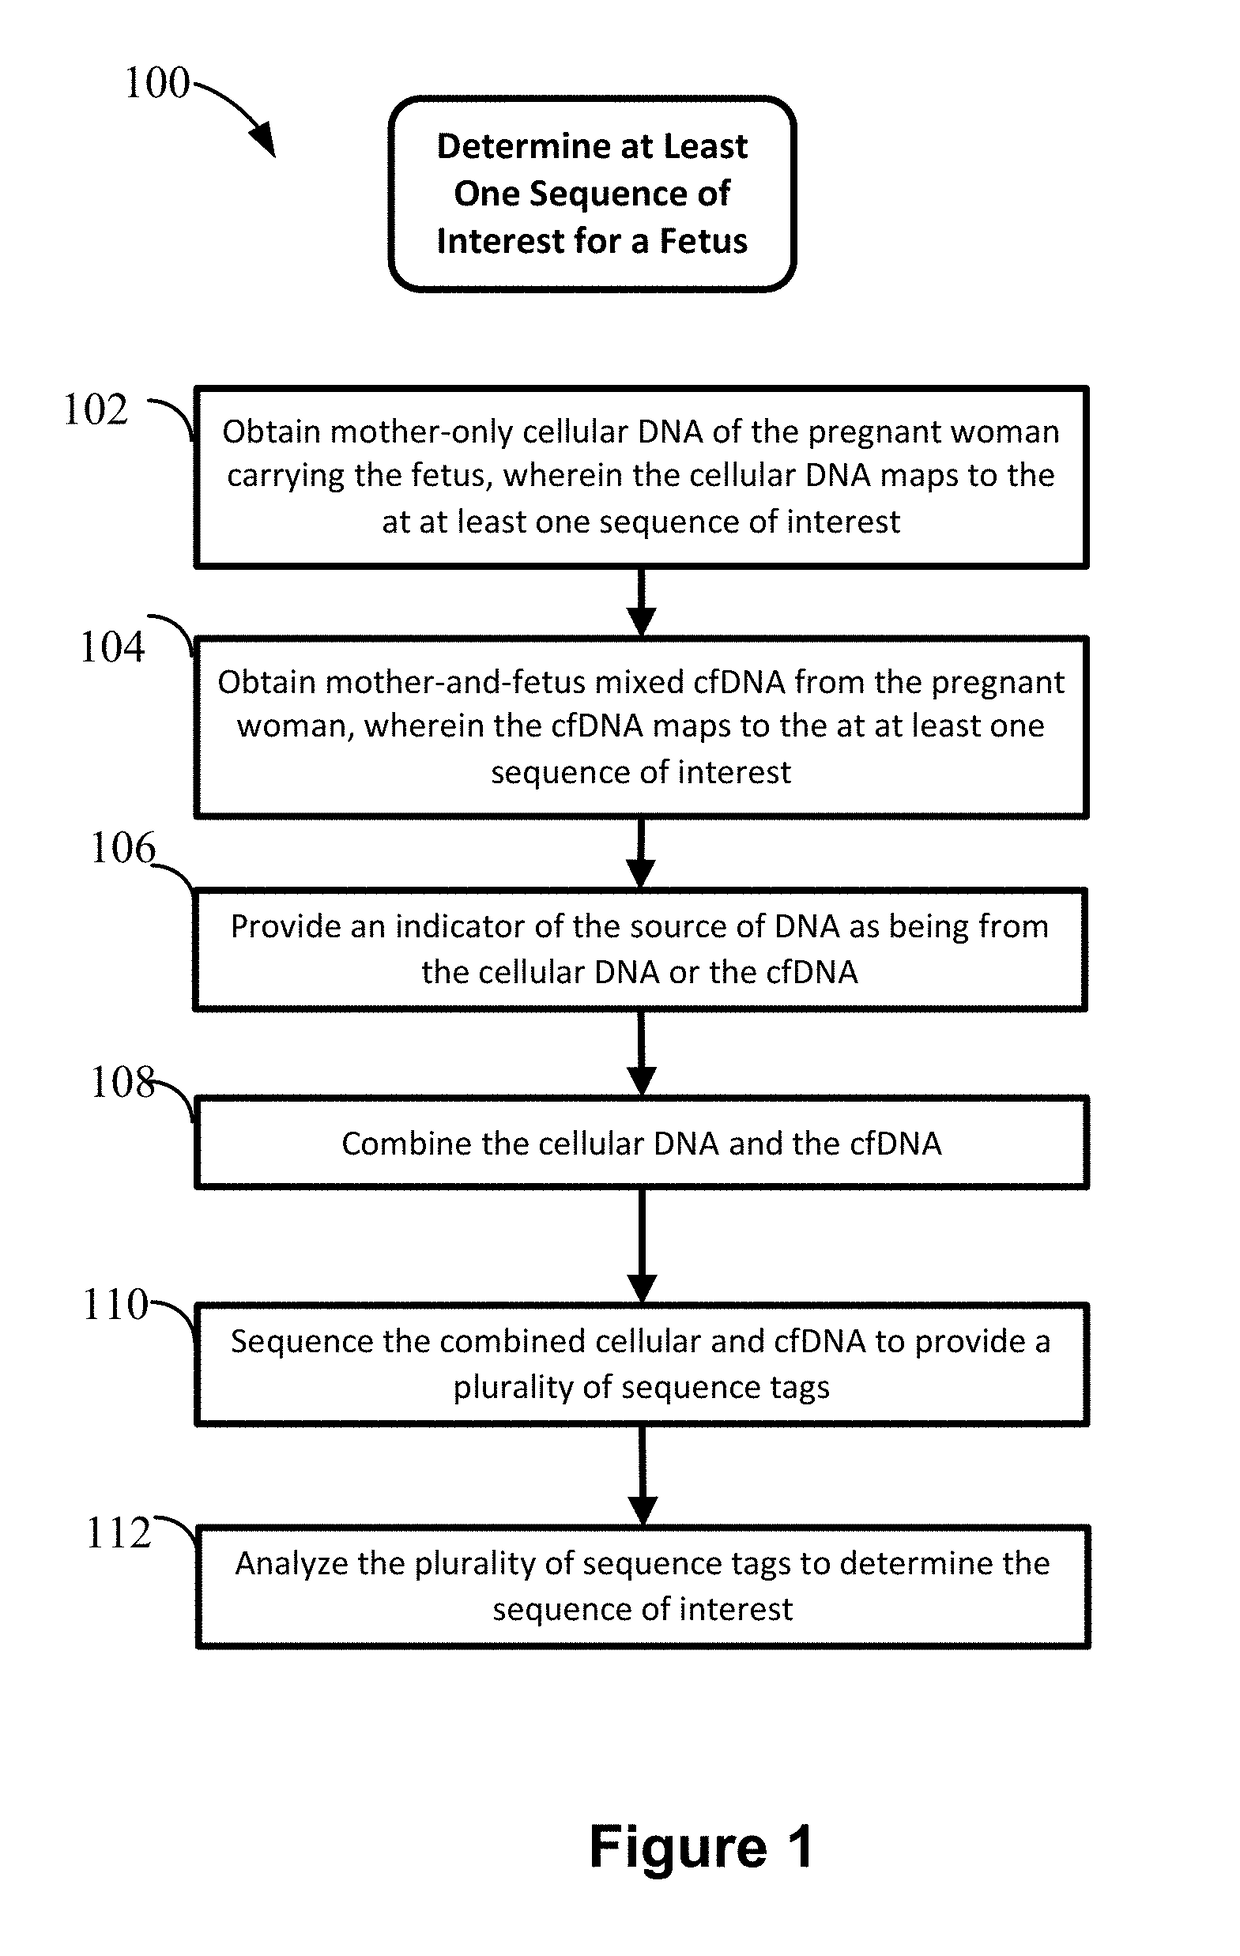 Non-invasive prenatal diagnosis of fetal genetic condition using cellular DNA and cell free DNA